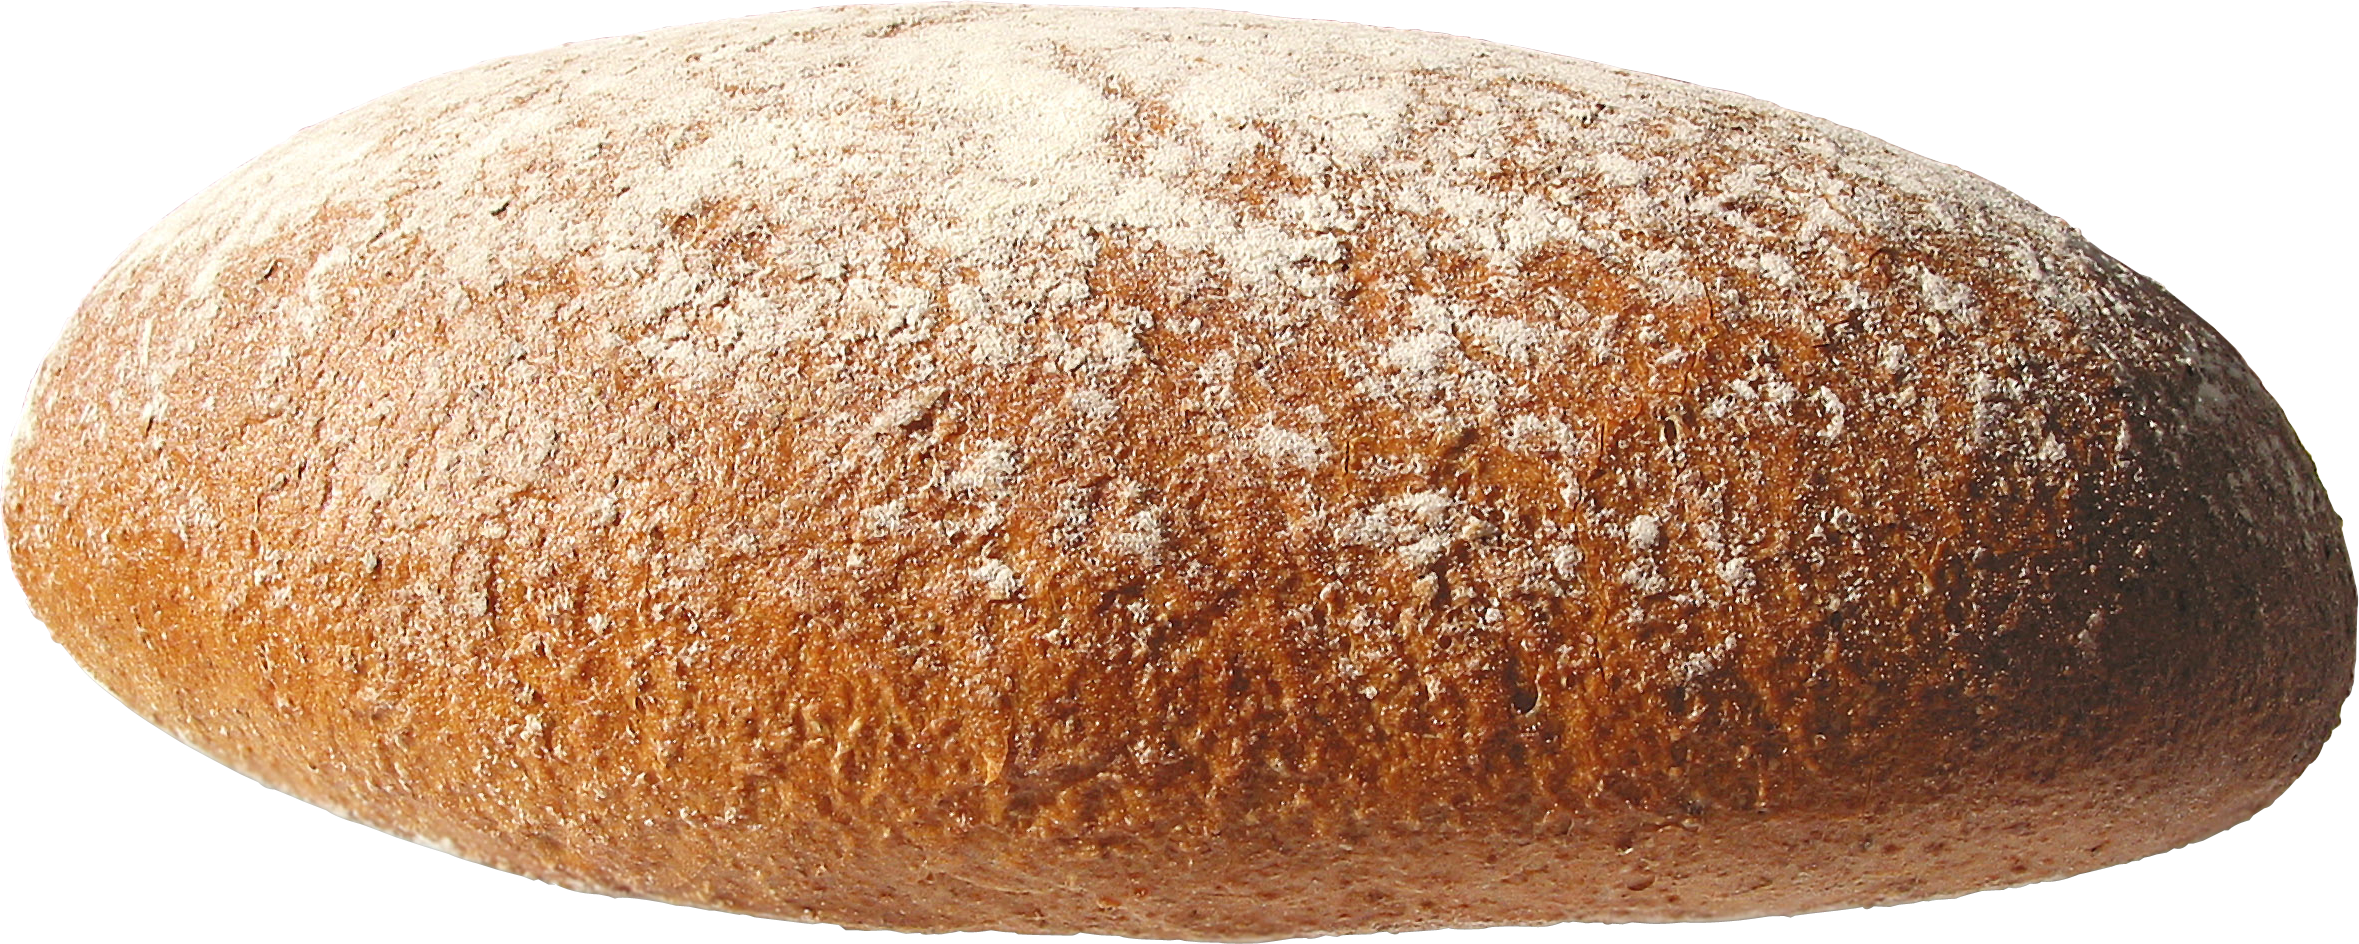 Bread Png Image Purepng Free Transparent Cc0 Png Image Library